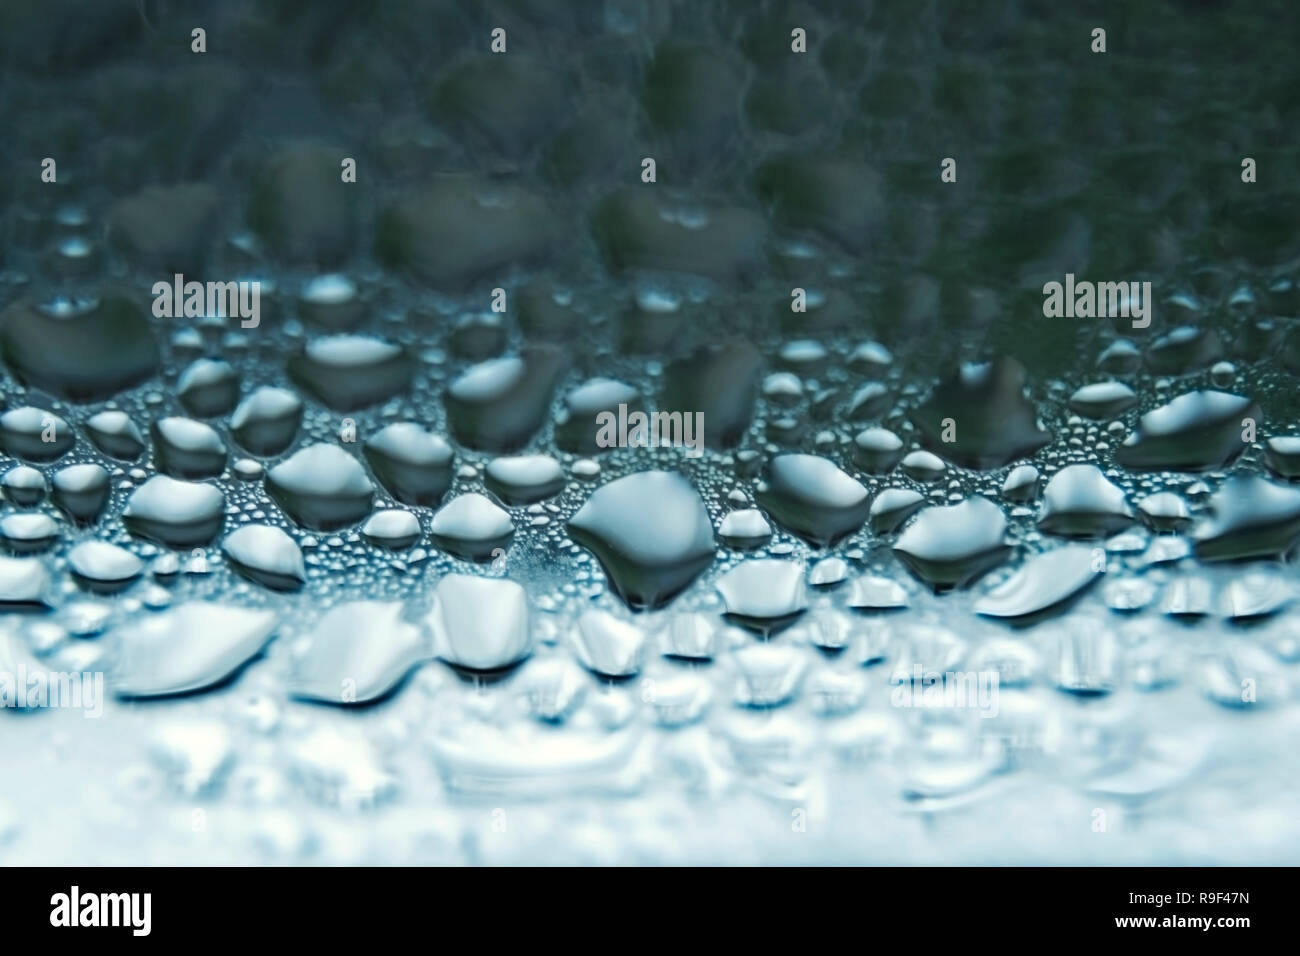 Drops of water on a window pane close-up Stock Photo